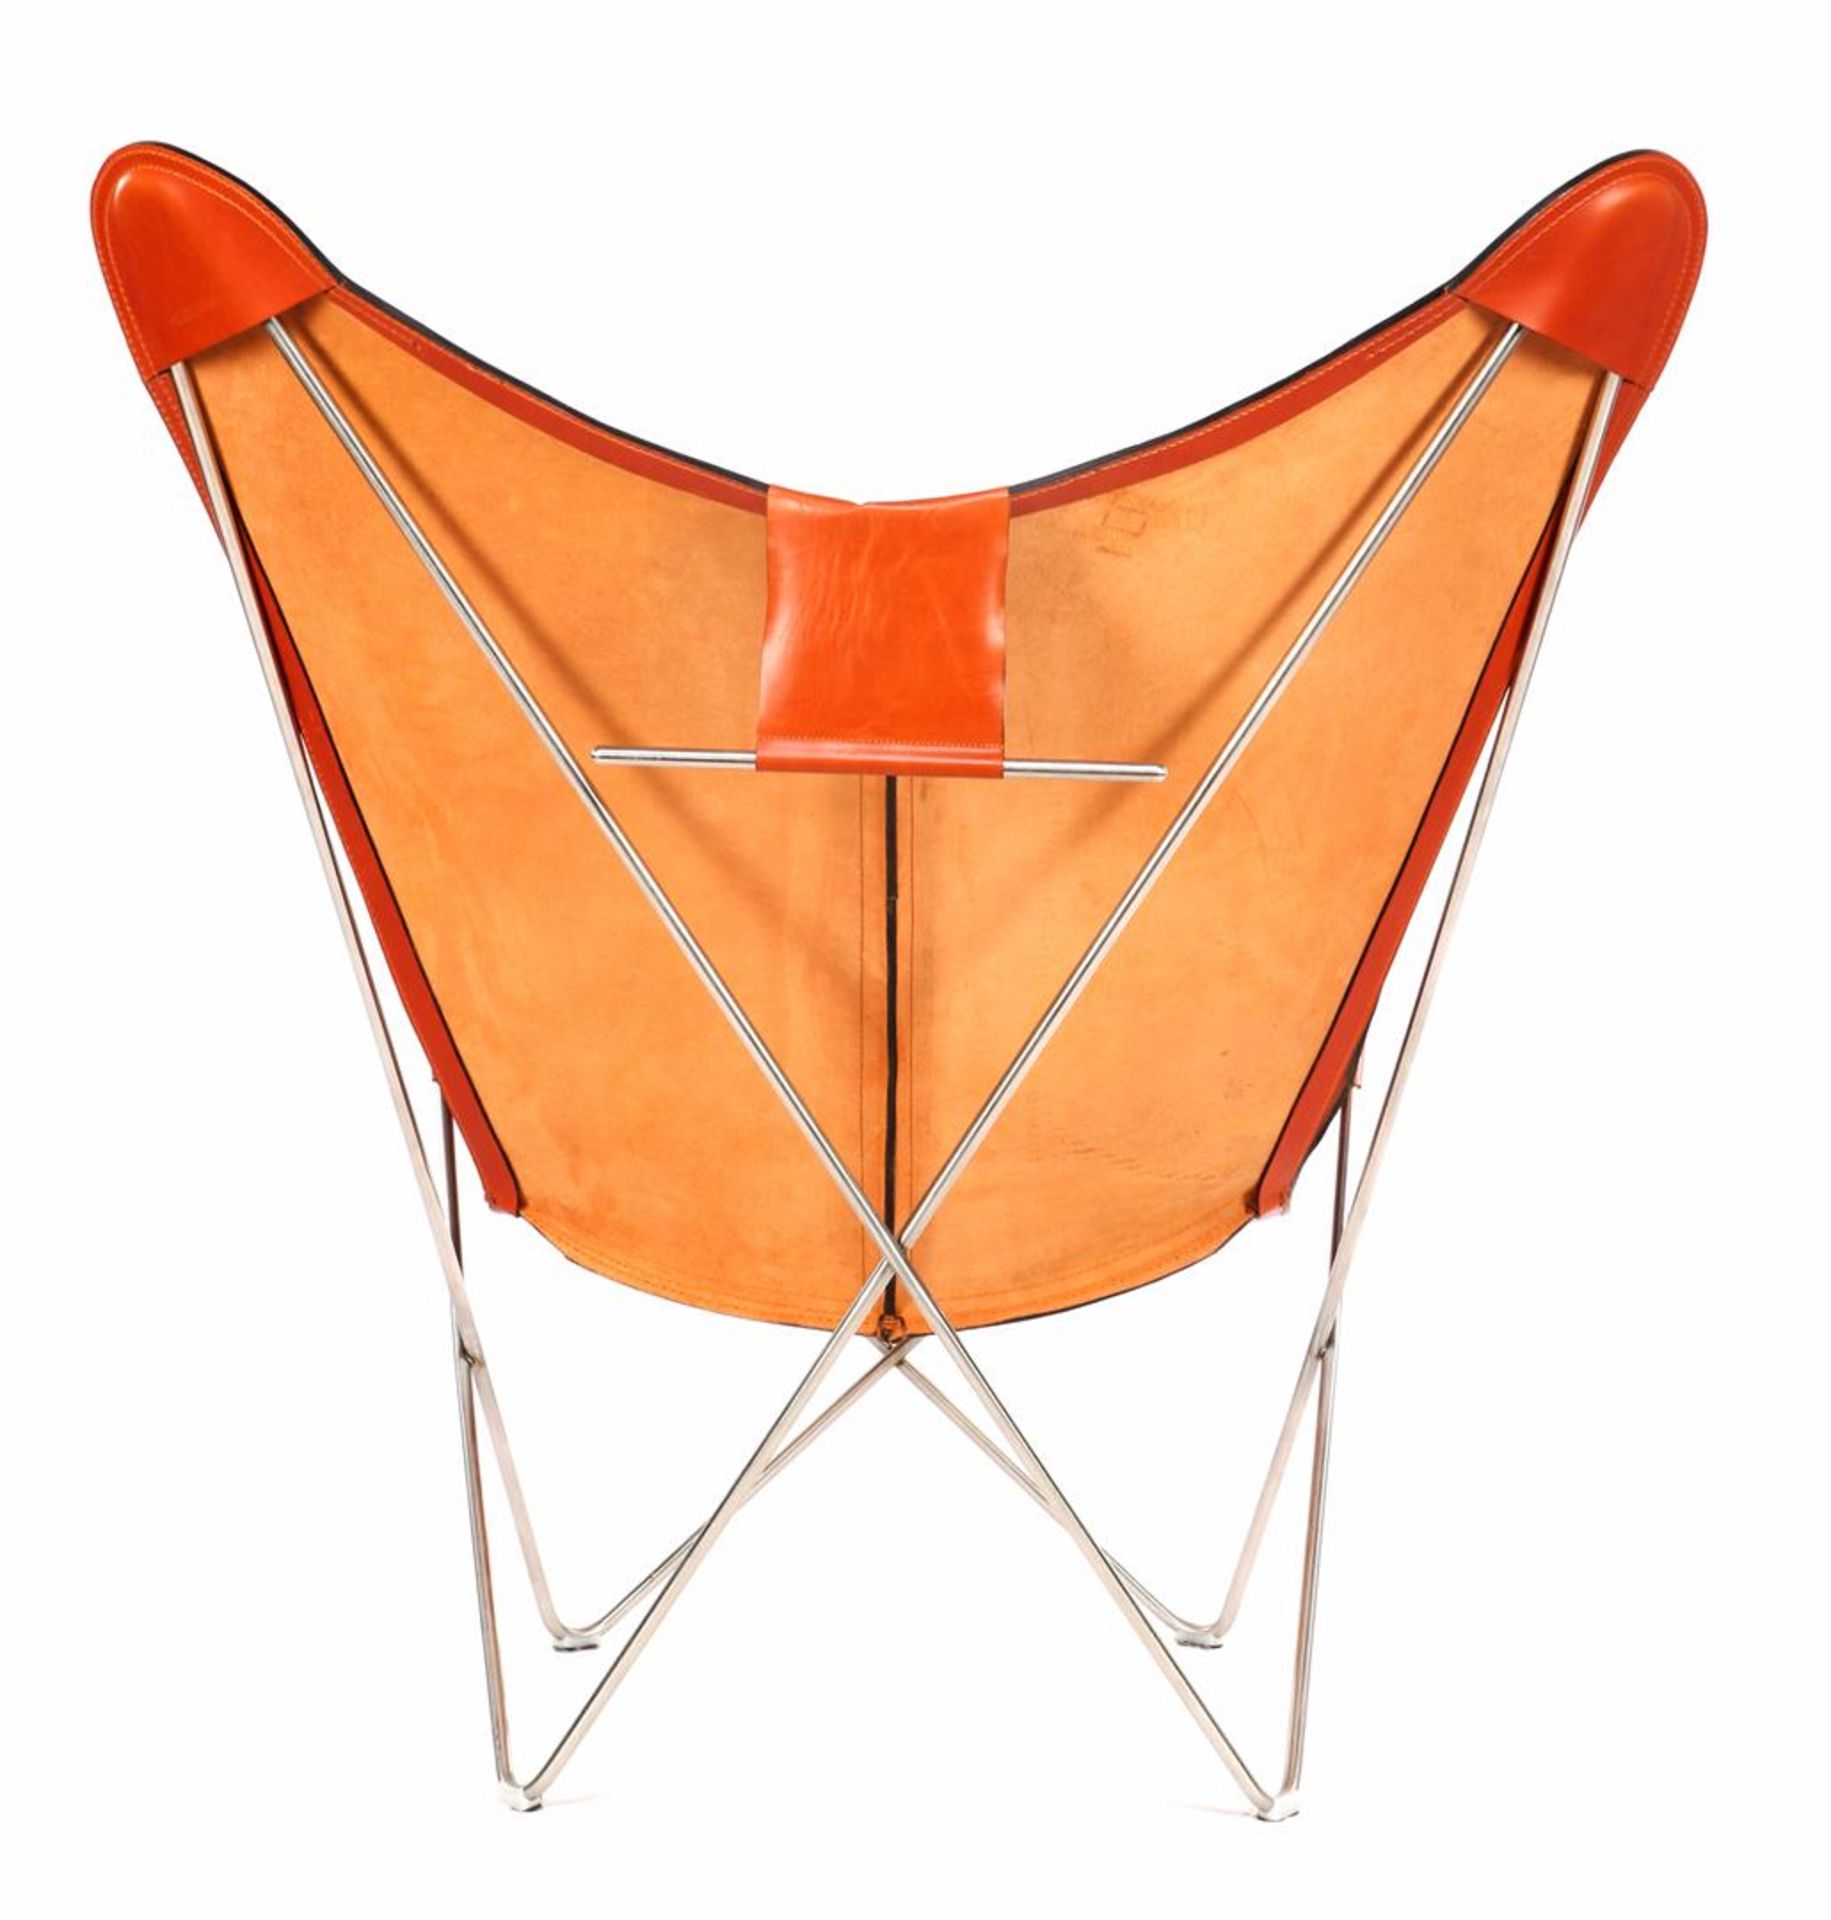 Cognac-colored leather butterfly chair - Image 2 of 3